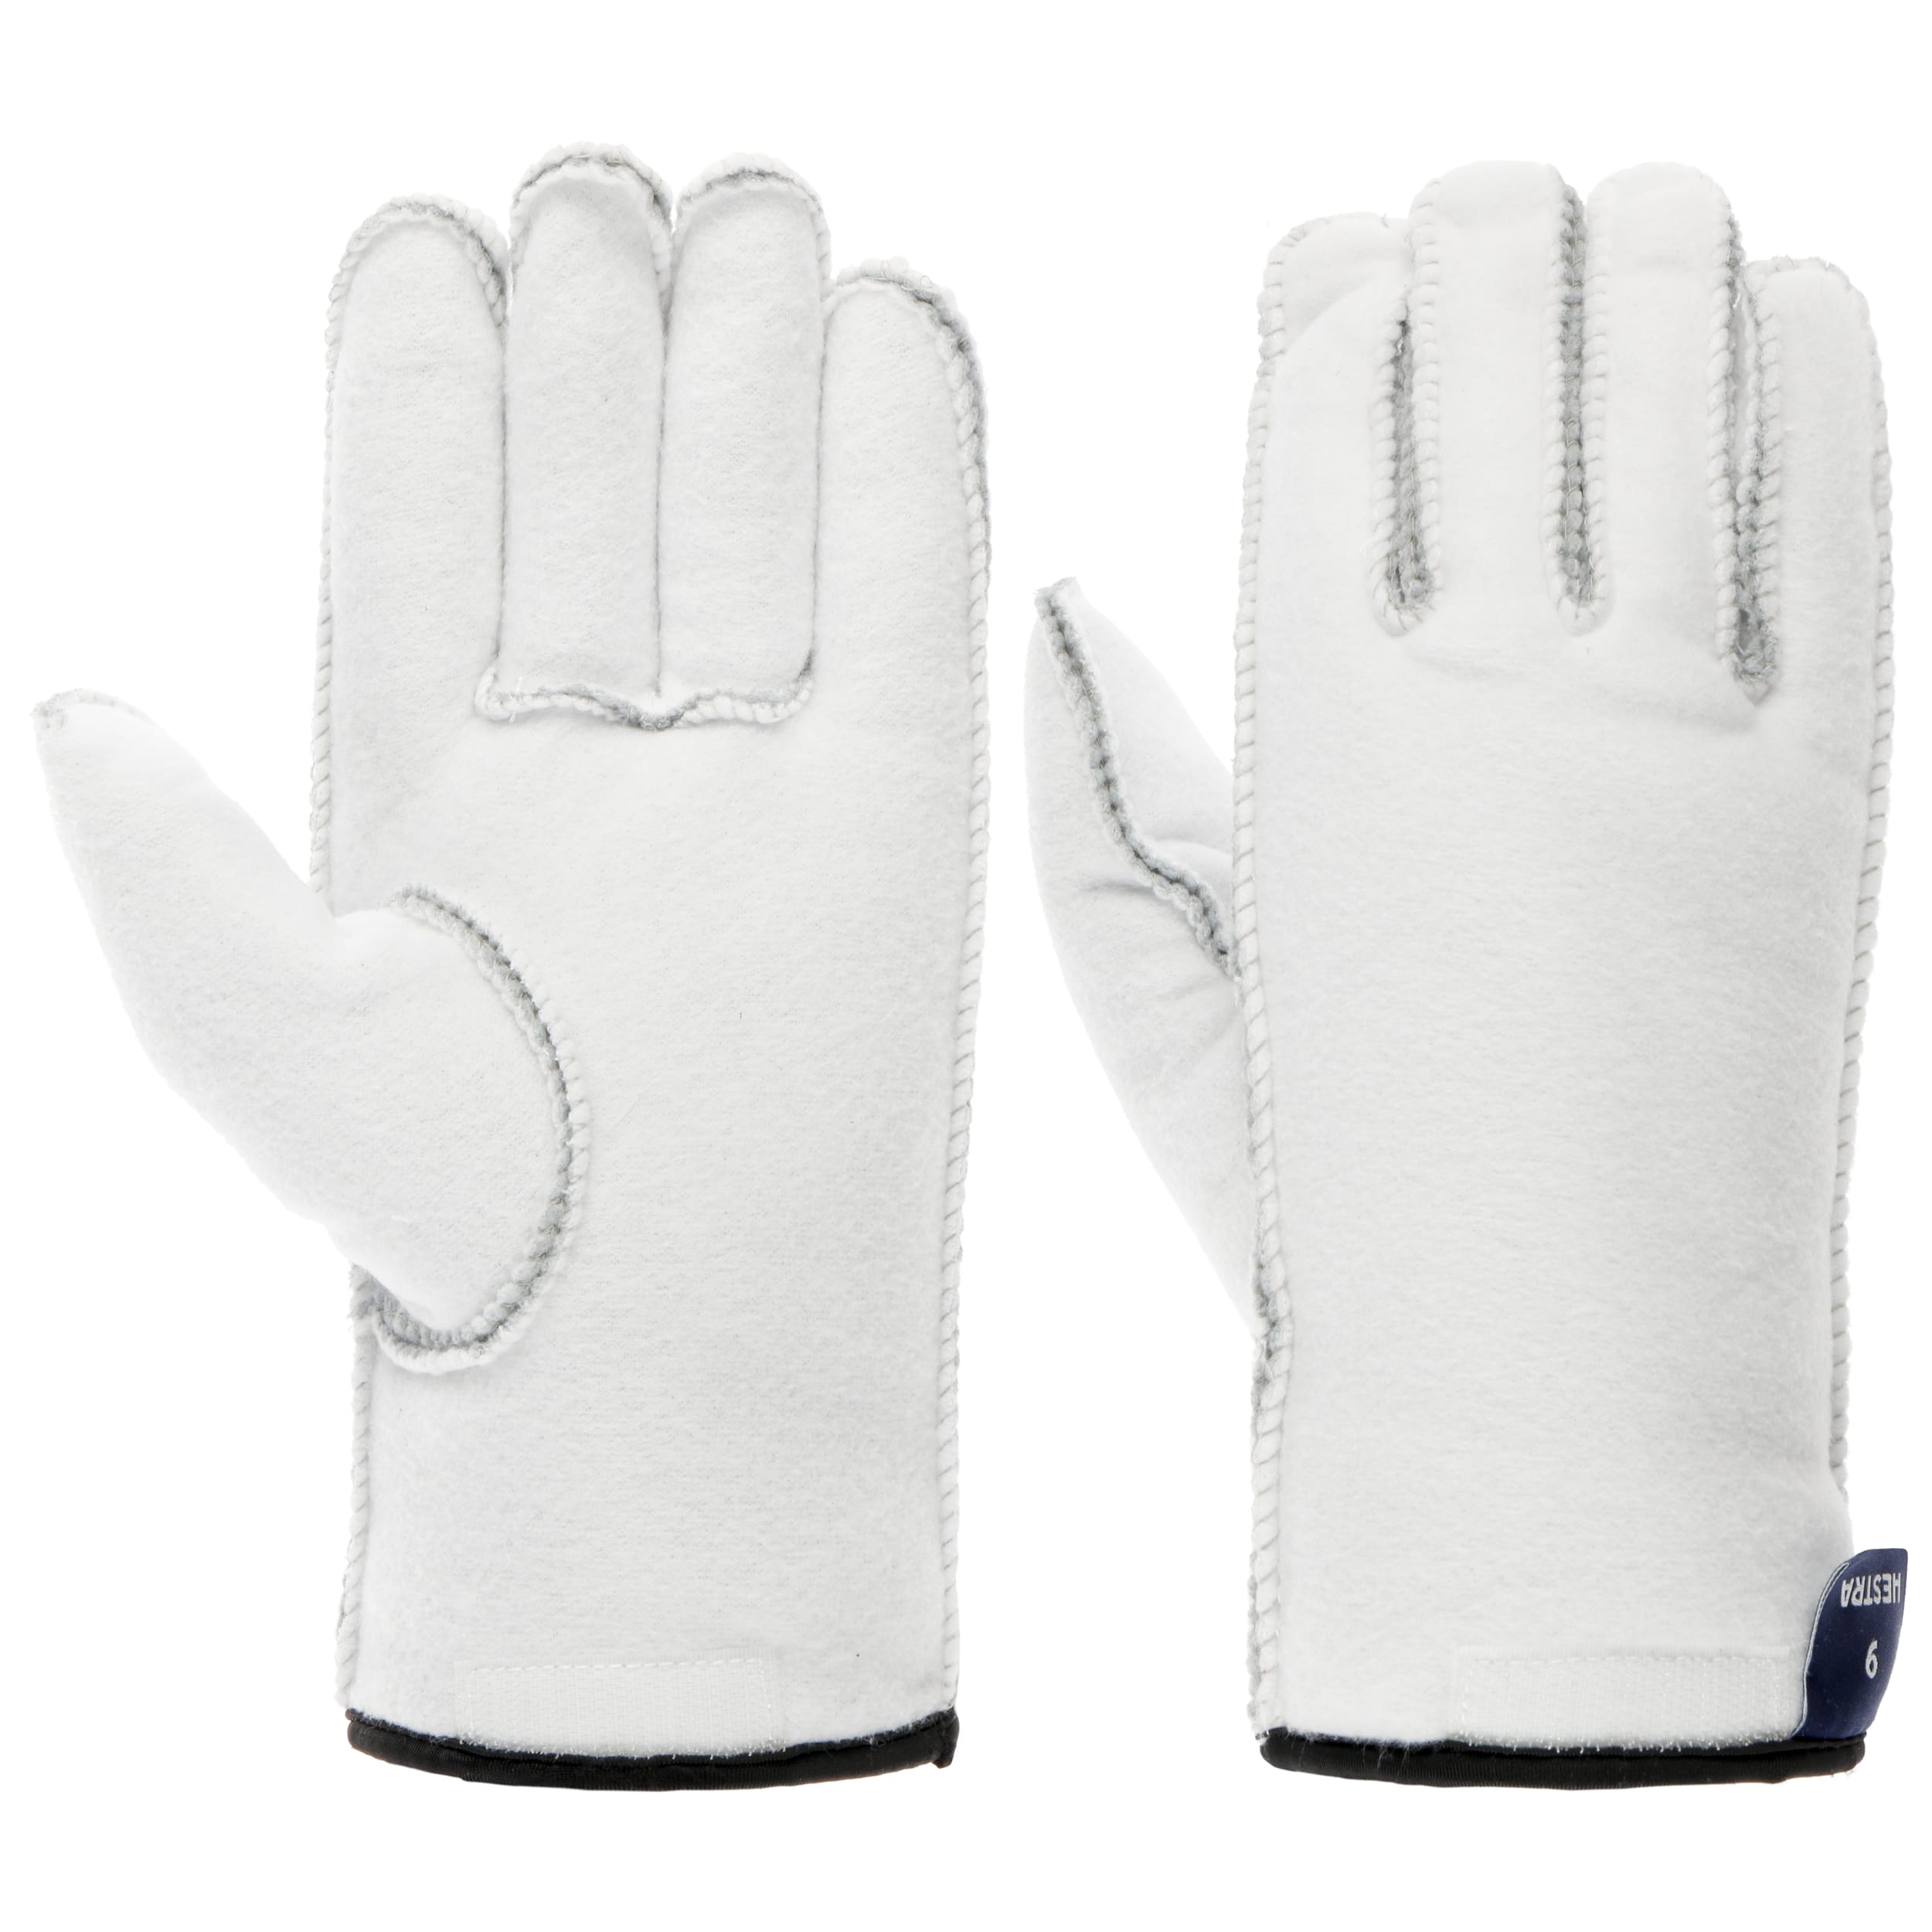 Knit Tech Grip TG 2.0 Graphic Gloves by Nike - 27,95 €